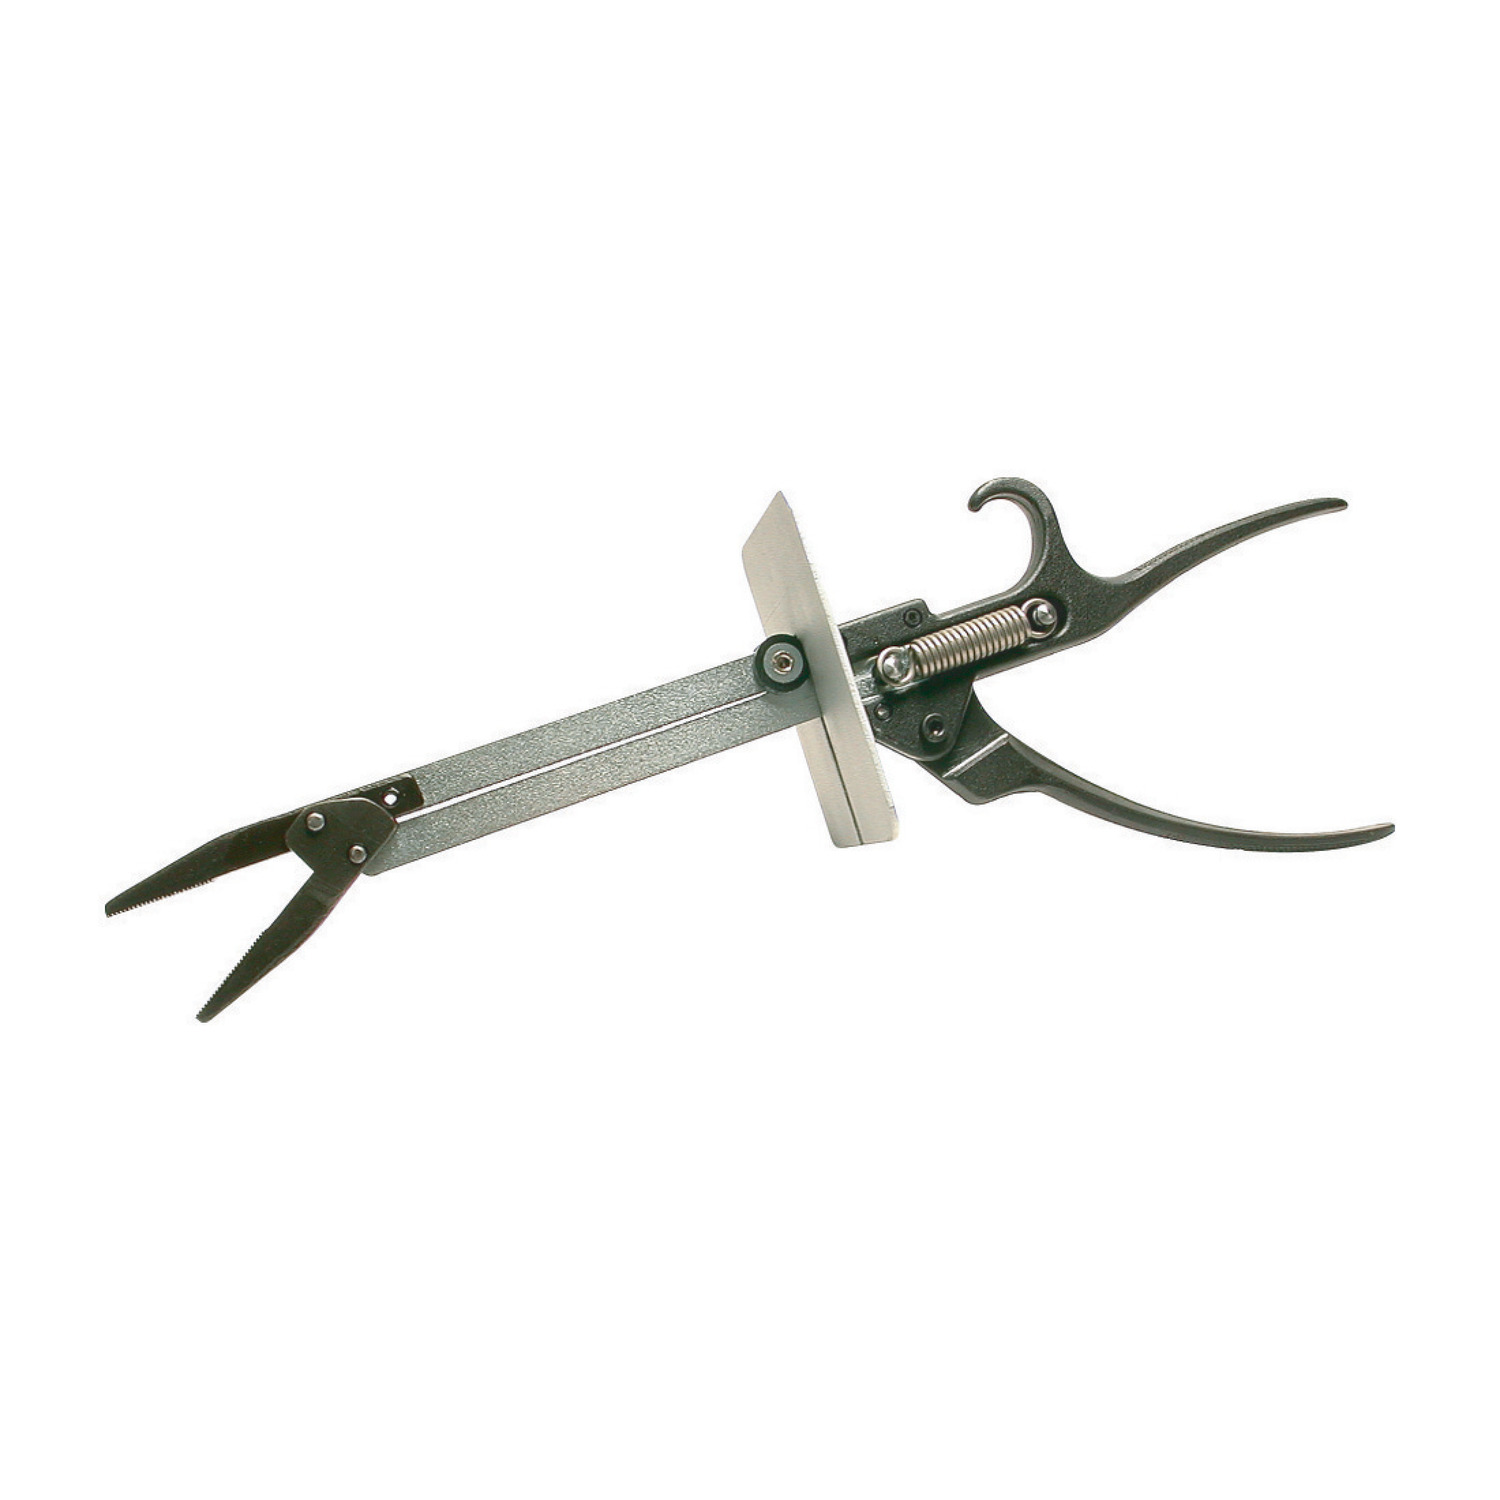 97060.W1035 Chip Pincers - with Guard flexible guard Also known as HT0920.11-035